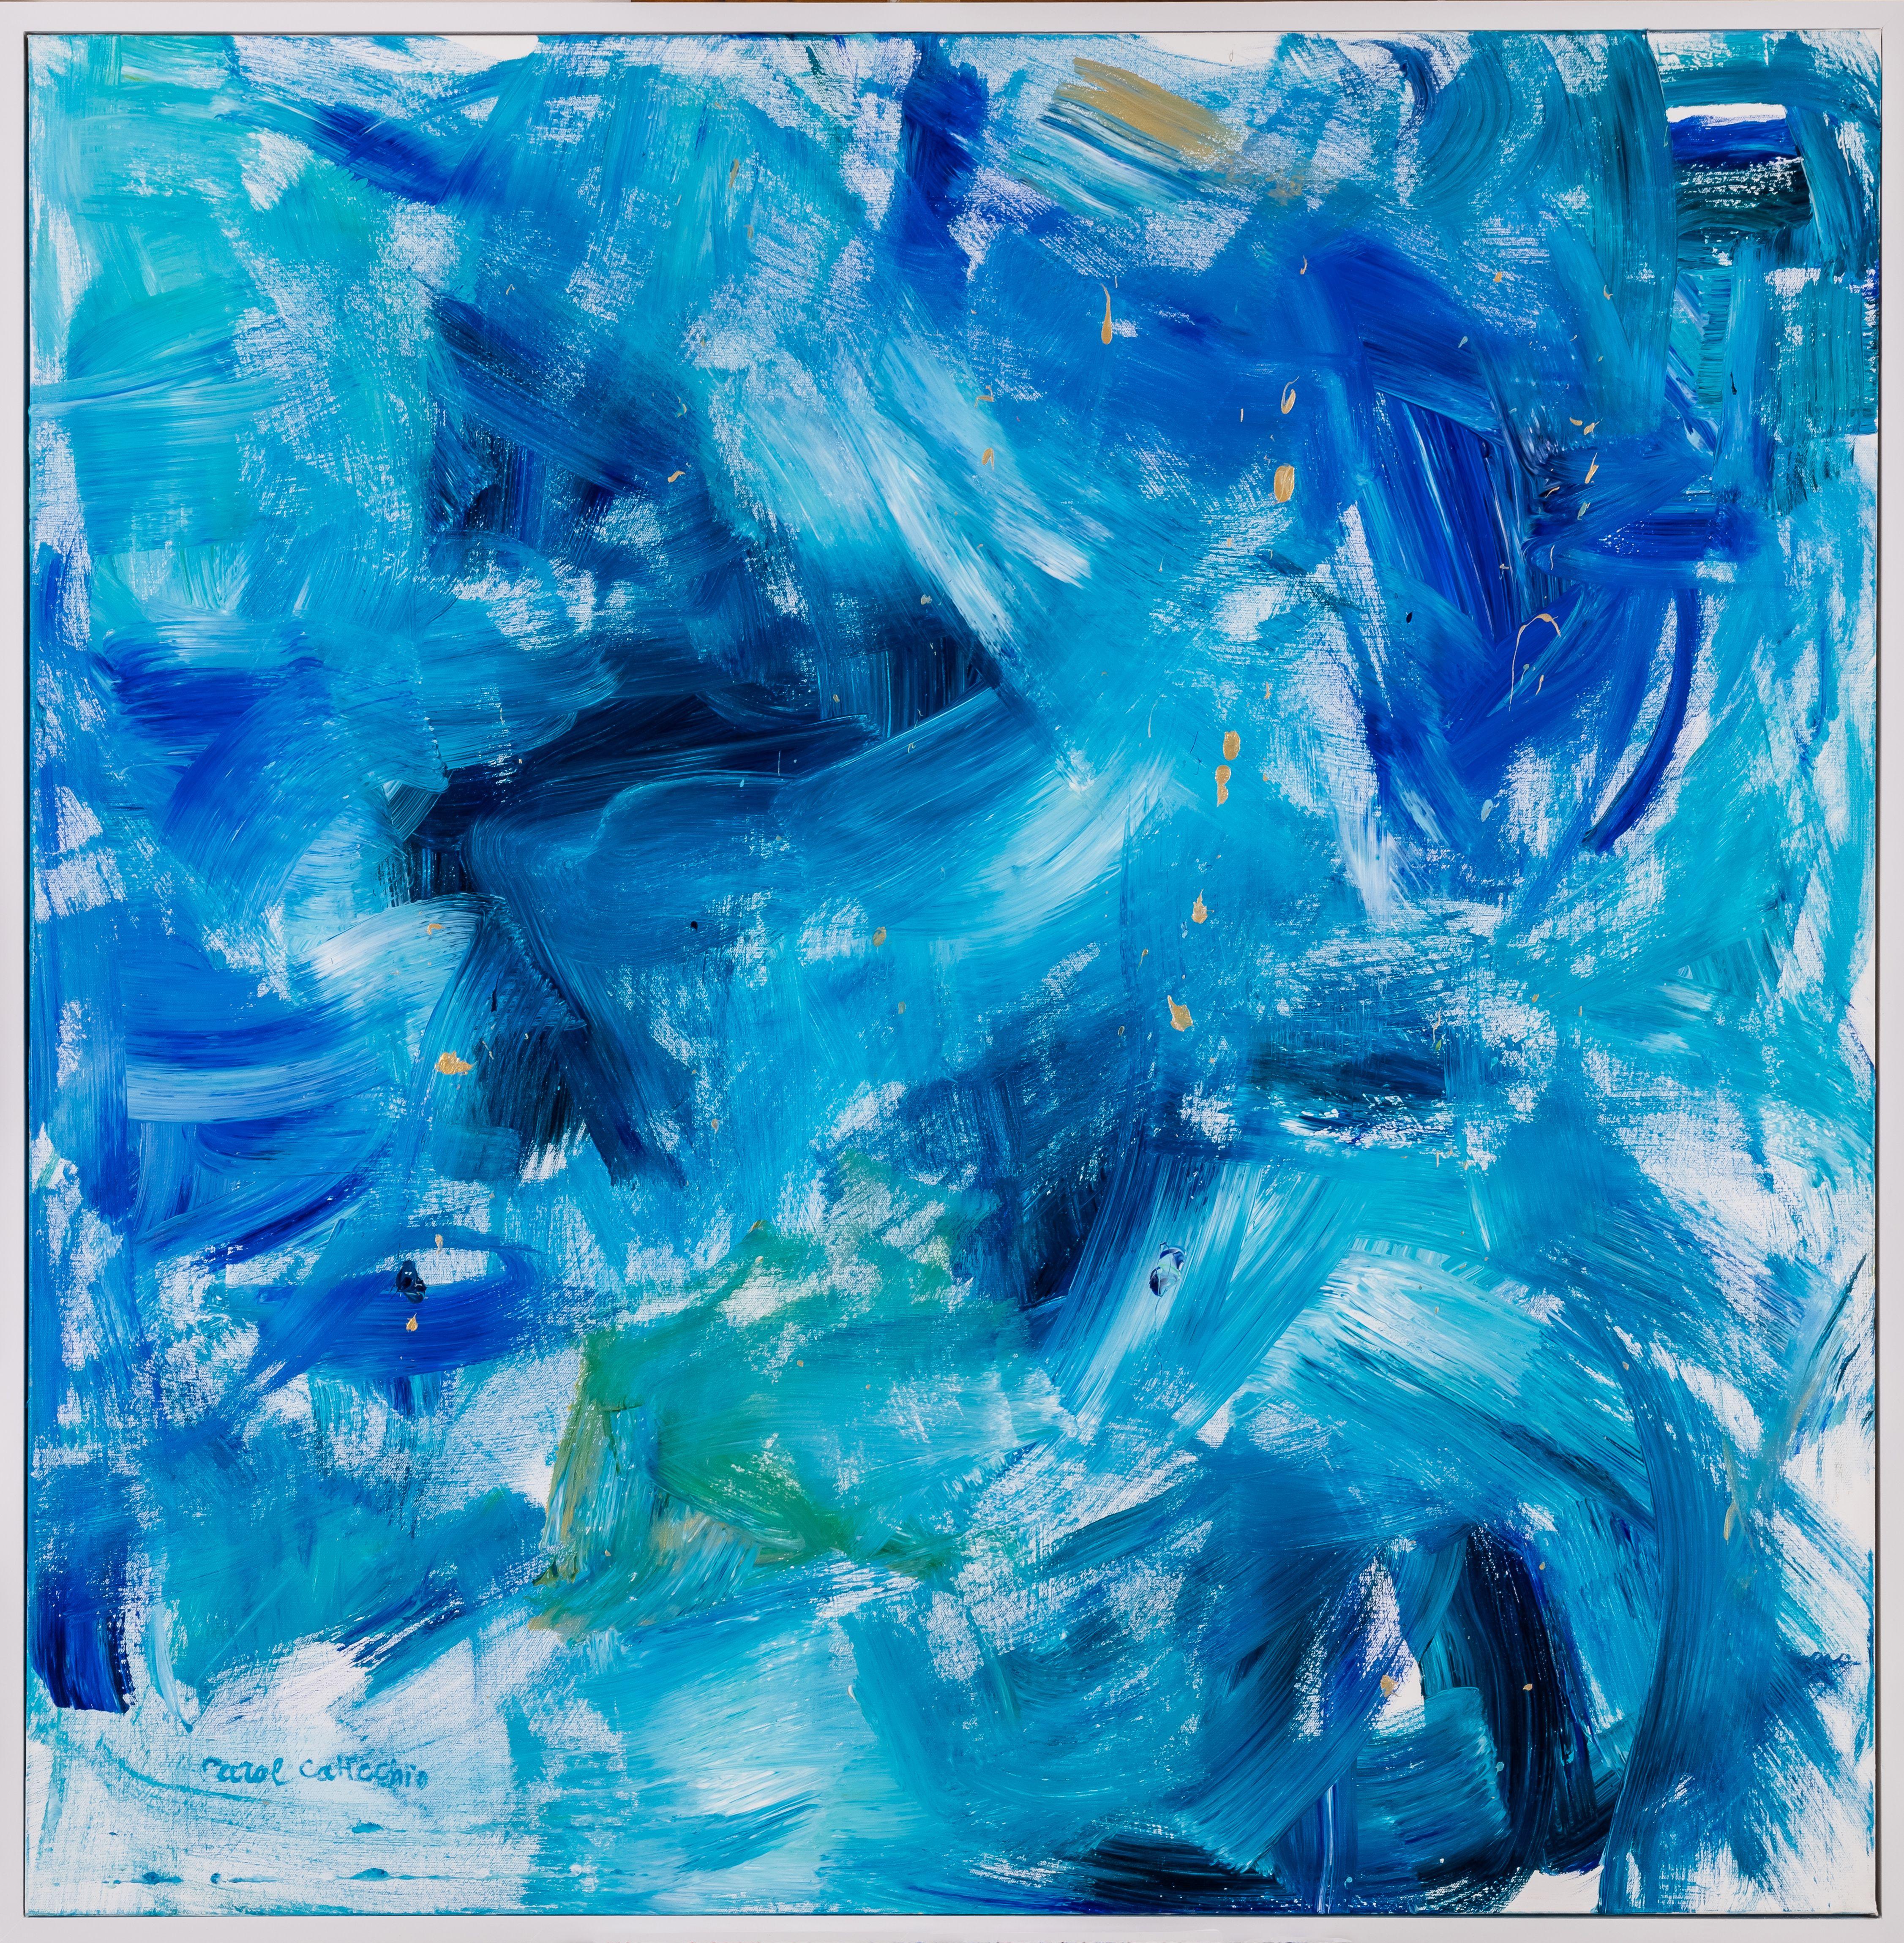 Carol Calicchio Abstract Painting - Cerulean Turquoise